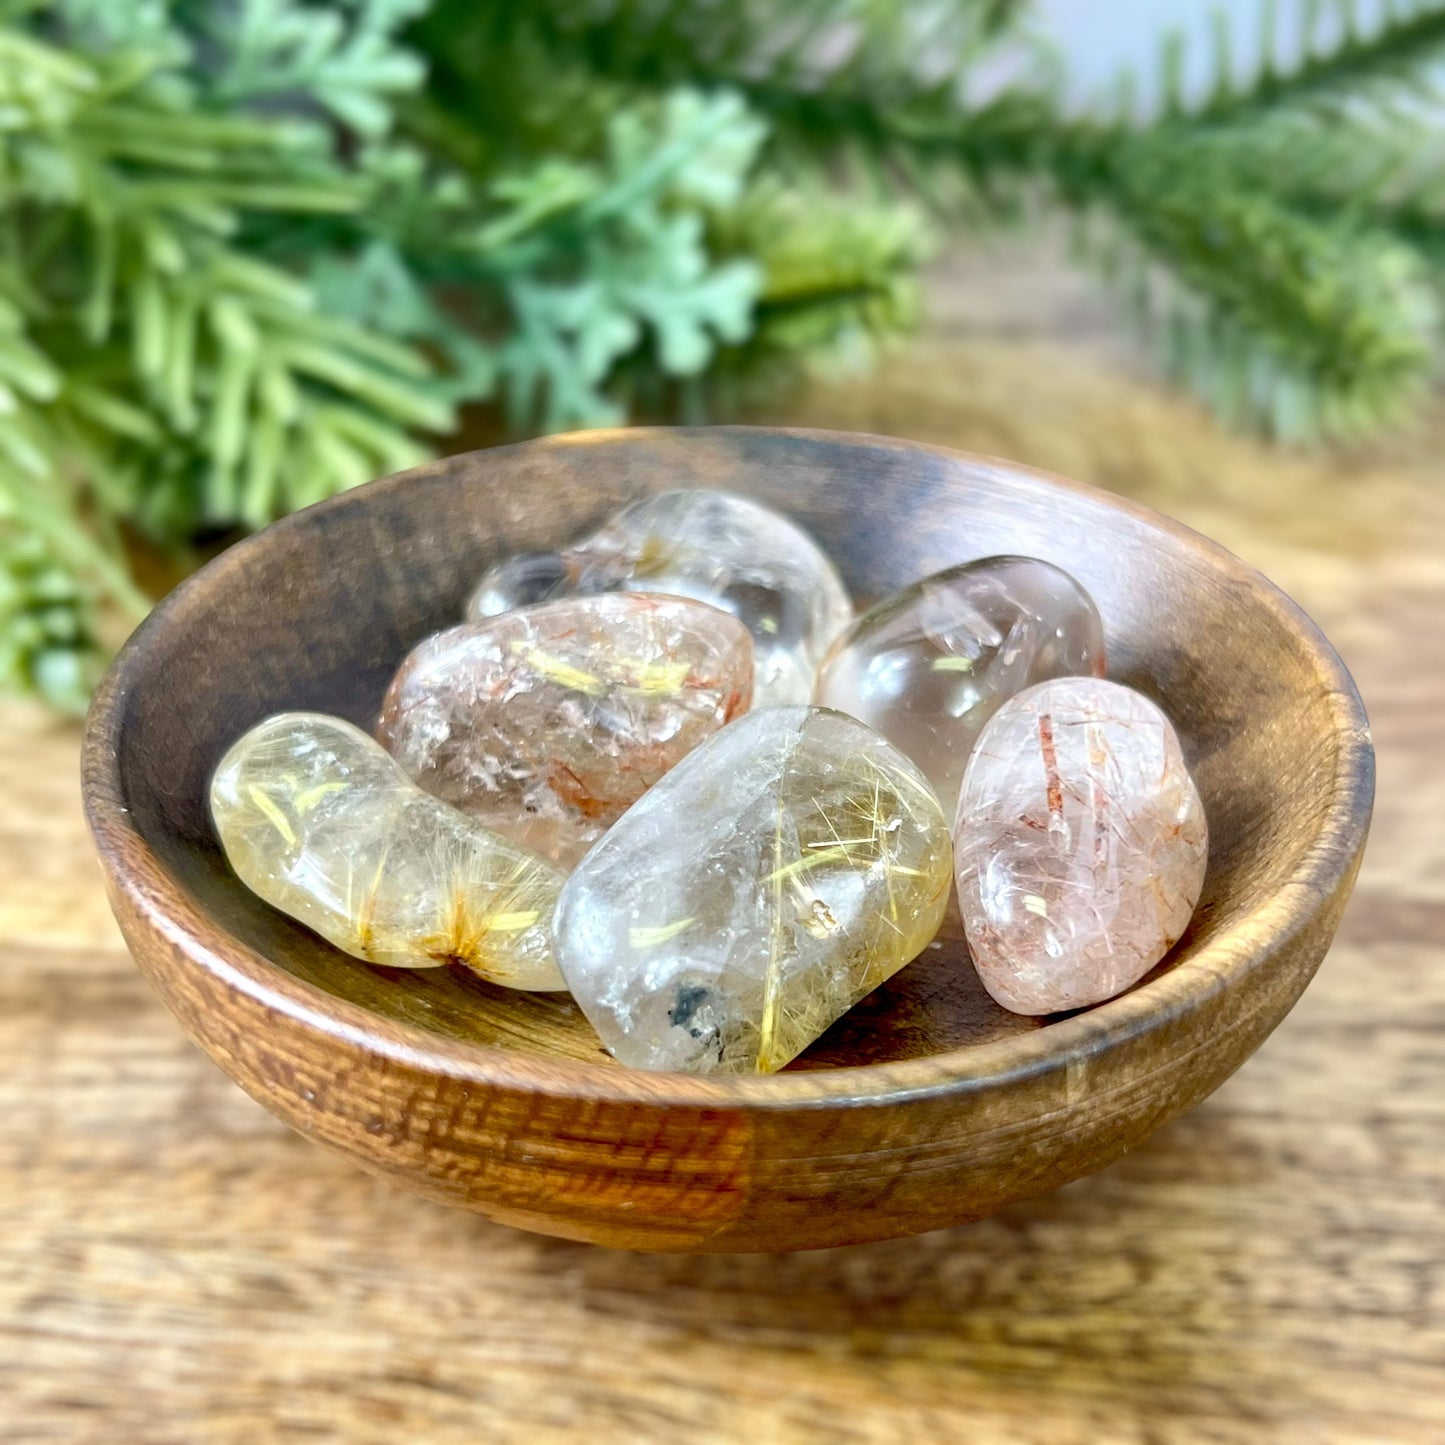 a group of Golden rutilated quartz tumbled crystals in a wooden bowl